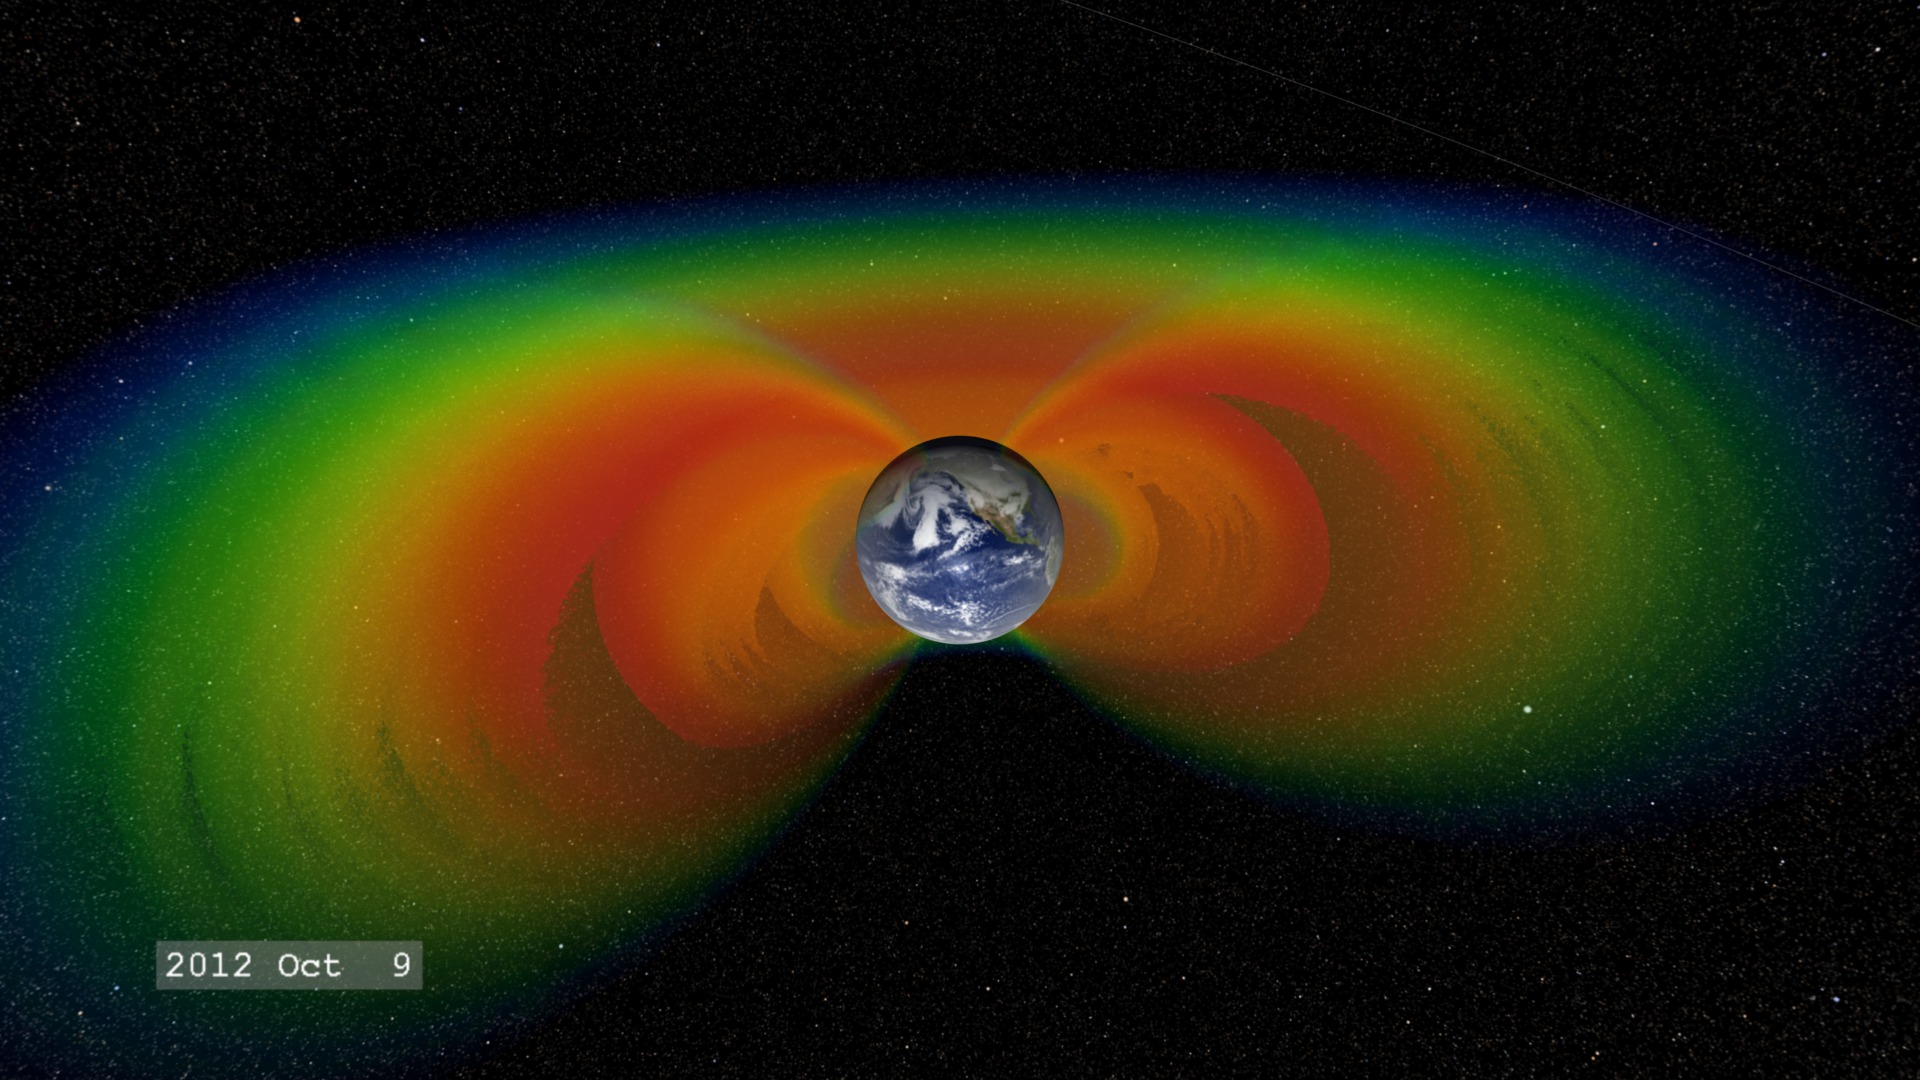 A cross-section view of the Earth's radiation belts.